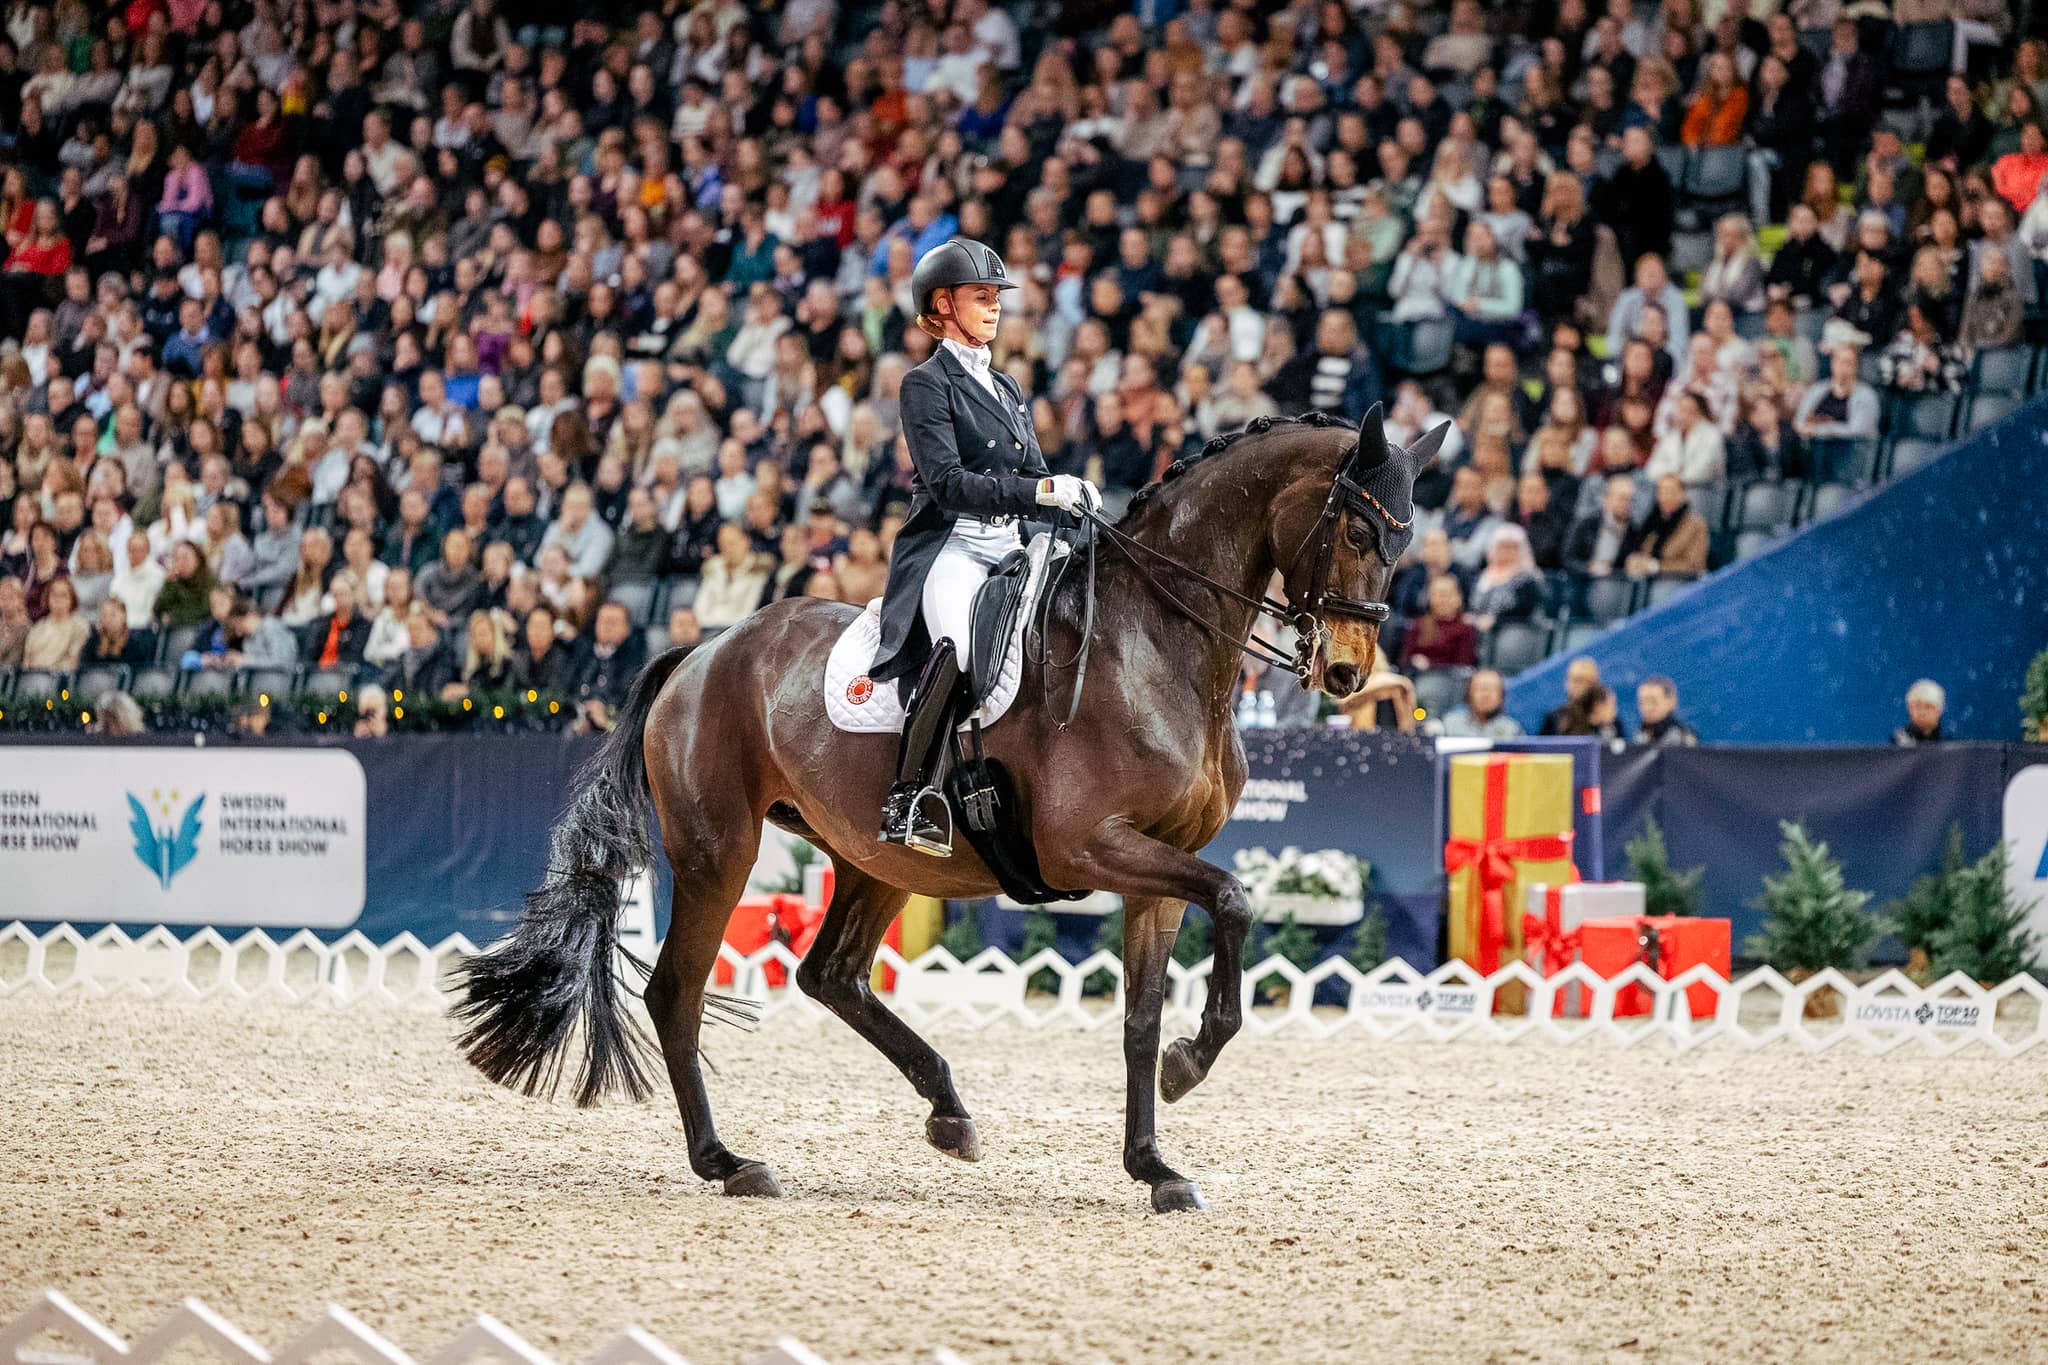 Germany’s jessica von bredow-werndl crowned top 10 champion for second year in a row